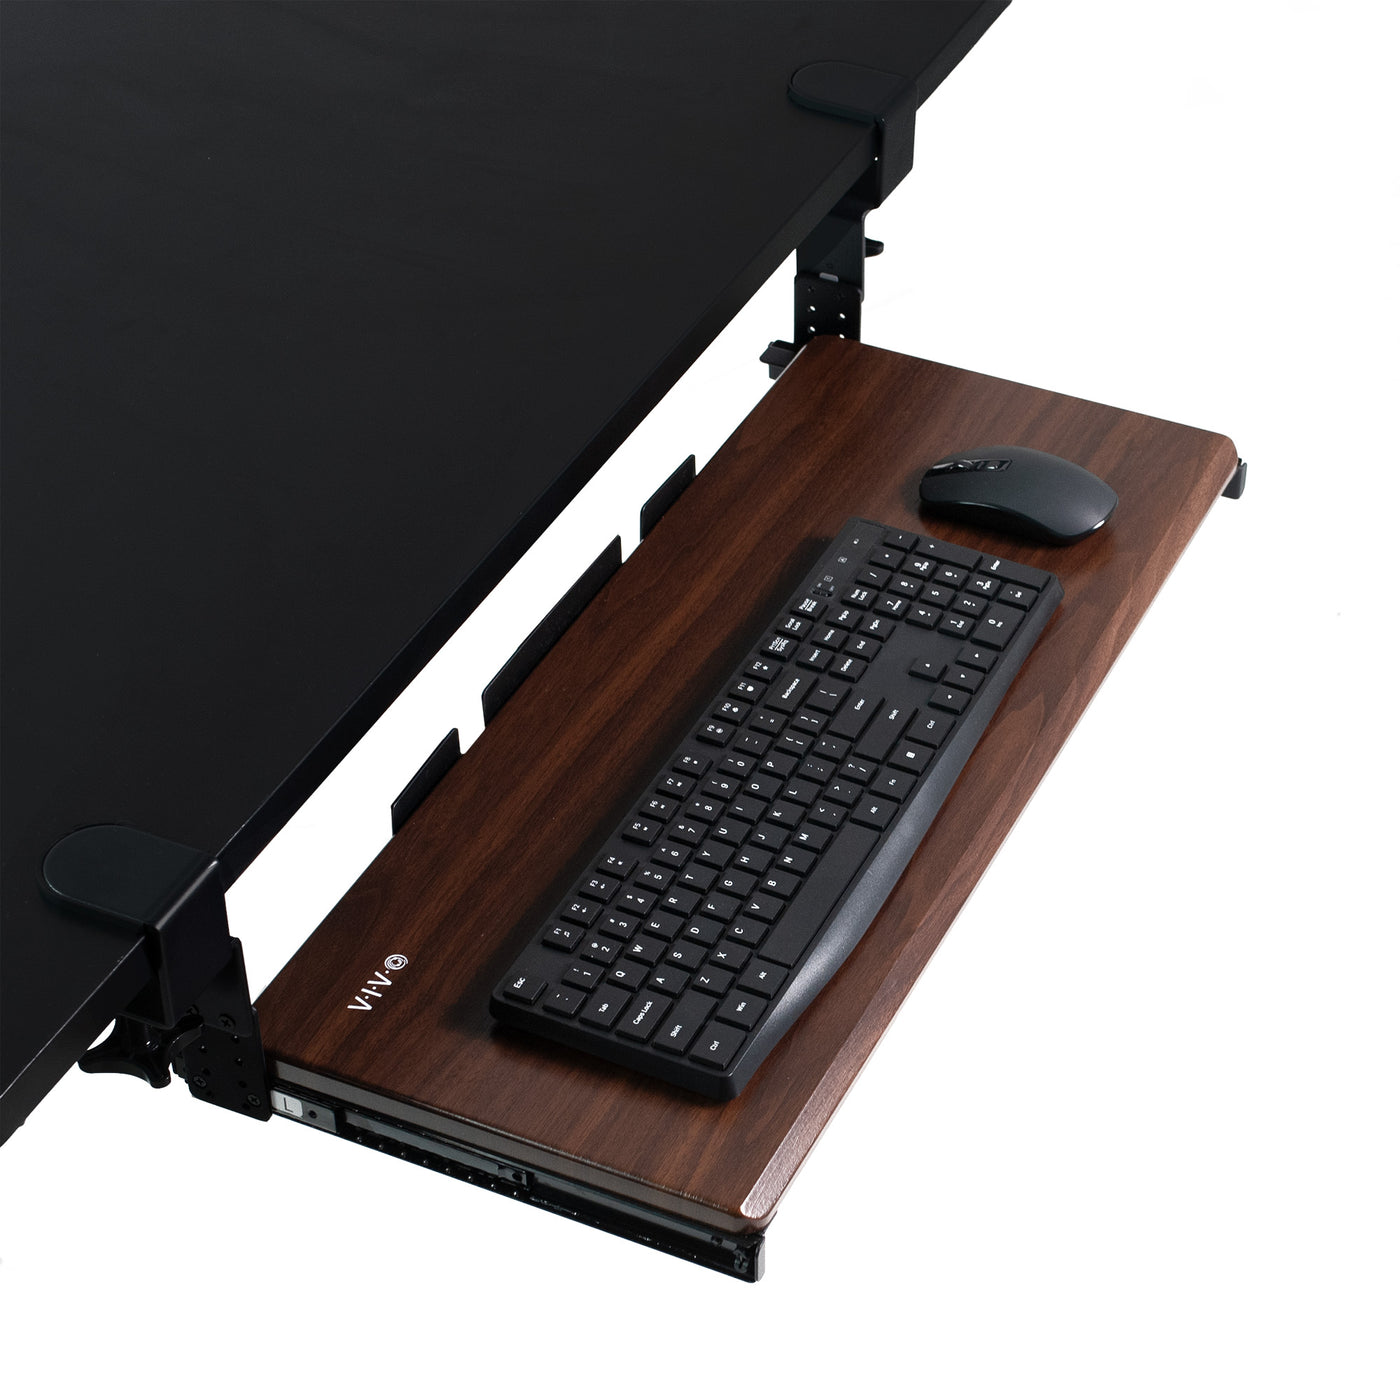 Ergonomic convenient clamp-on pullout keyboard tray.